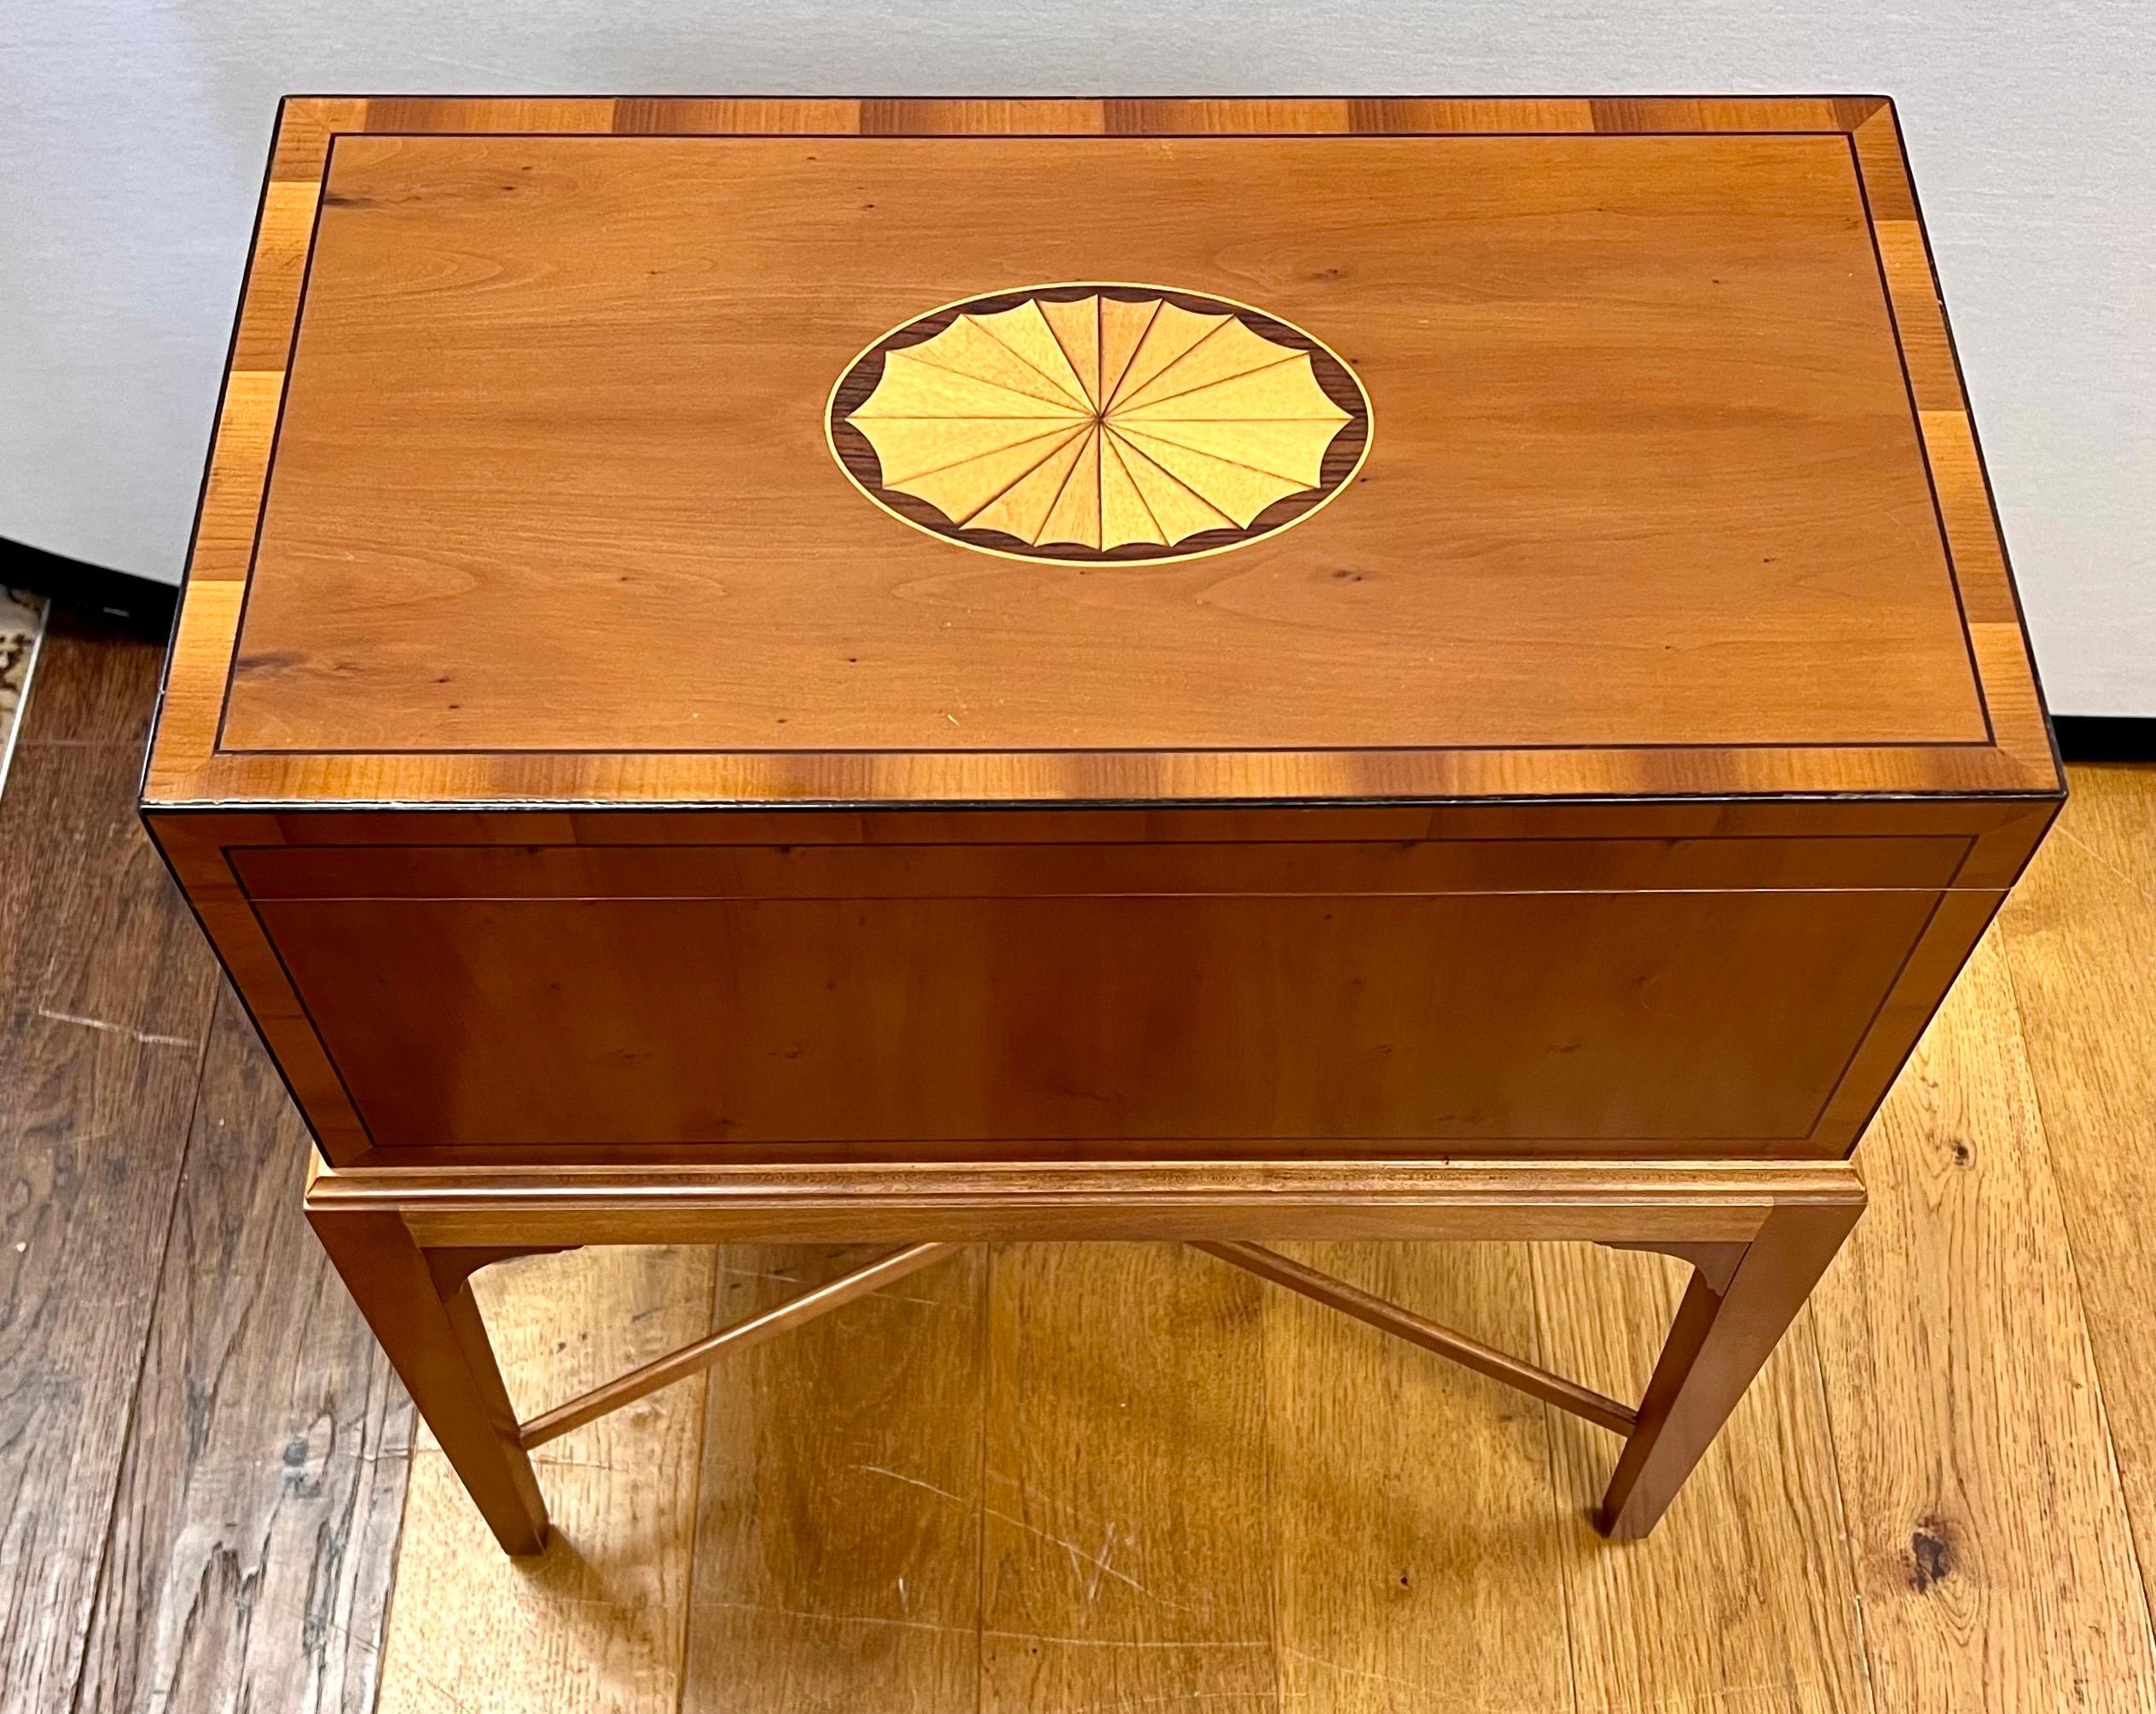 Small Baker Furniture flip top chest on x-base stand.  Features satinwood inlay on top and border.  Brass handles on side.